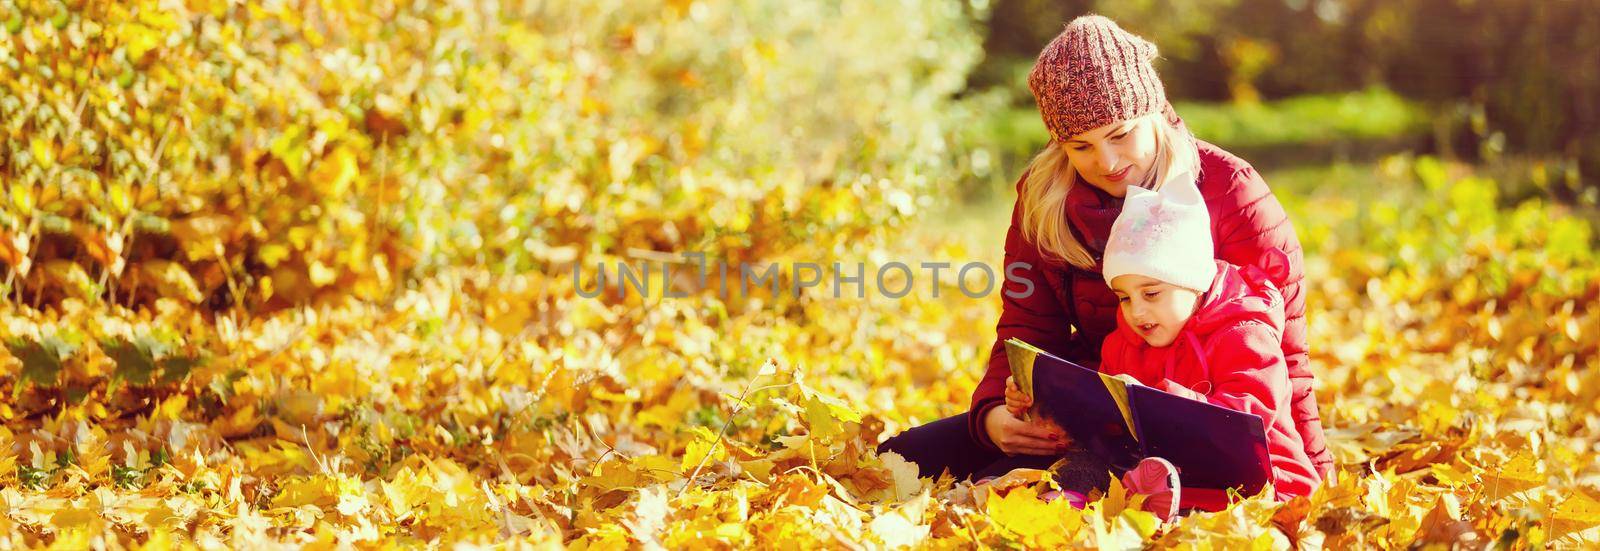 mother teaching daughter in autumn park, Mother teaching daughter to read. by Andelov13